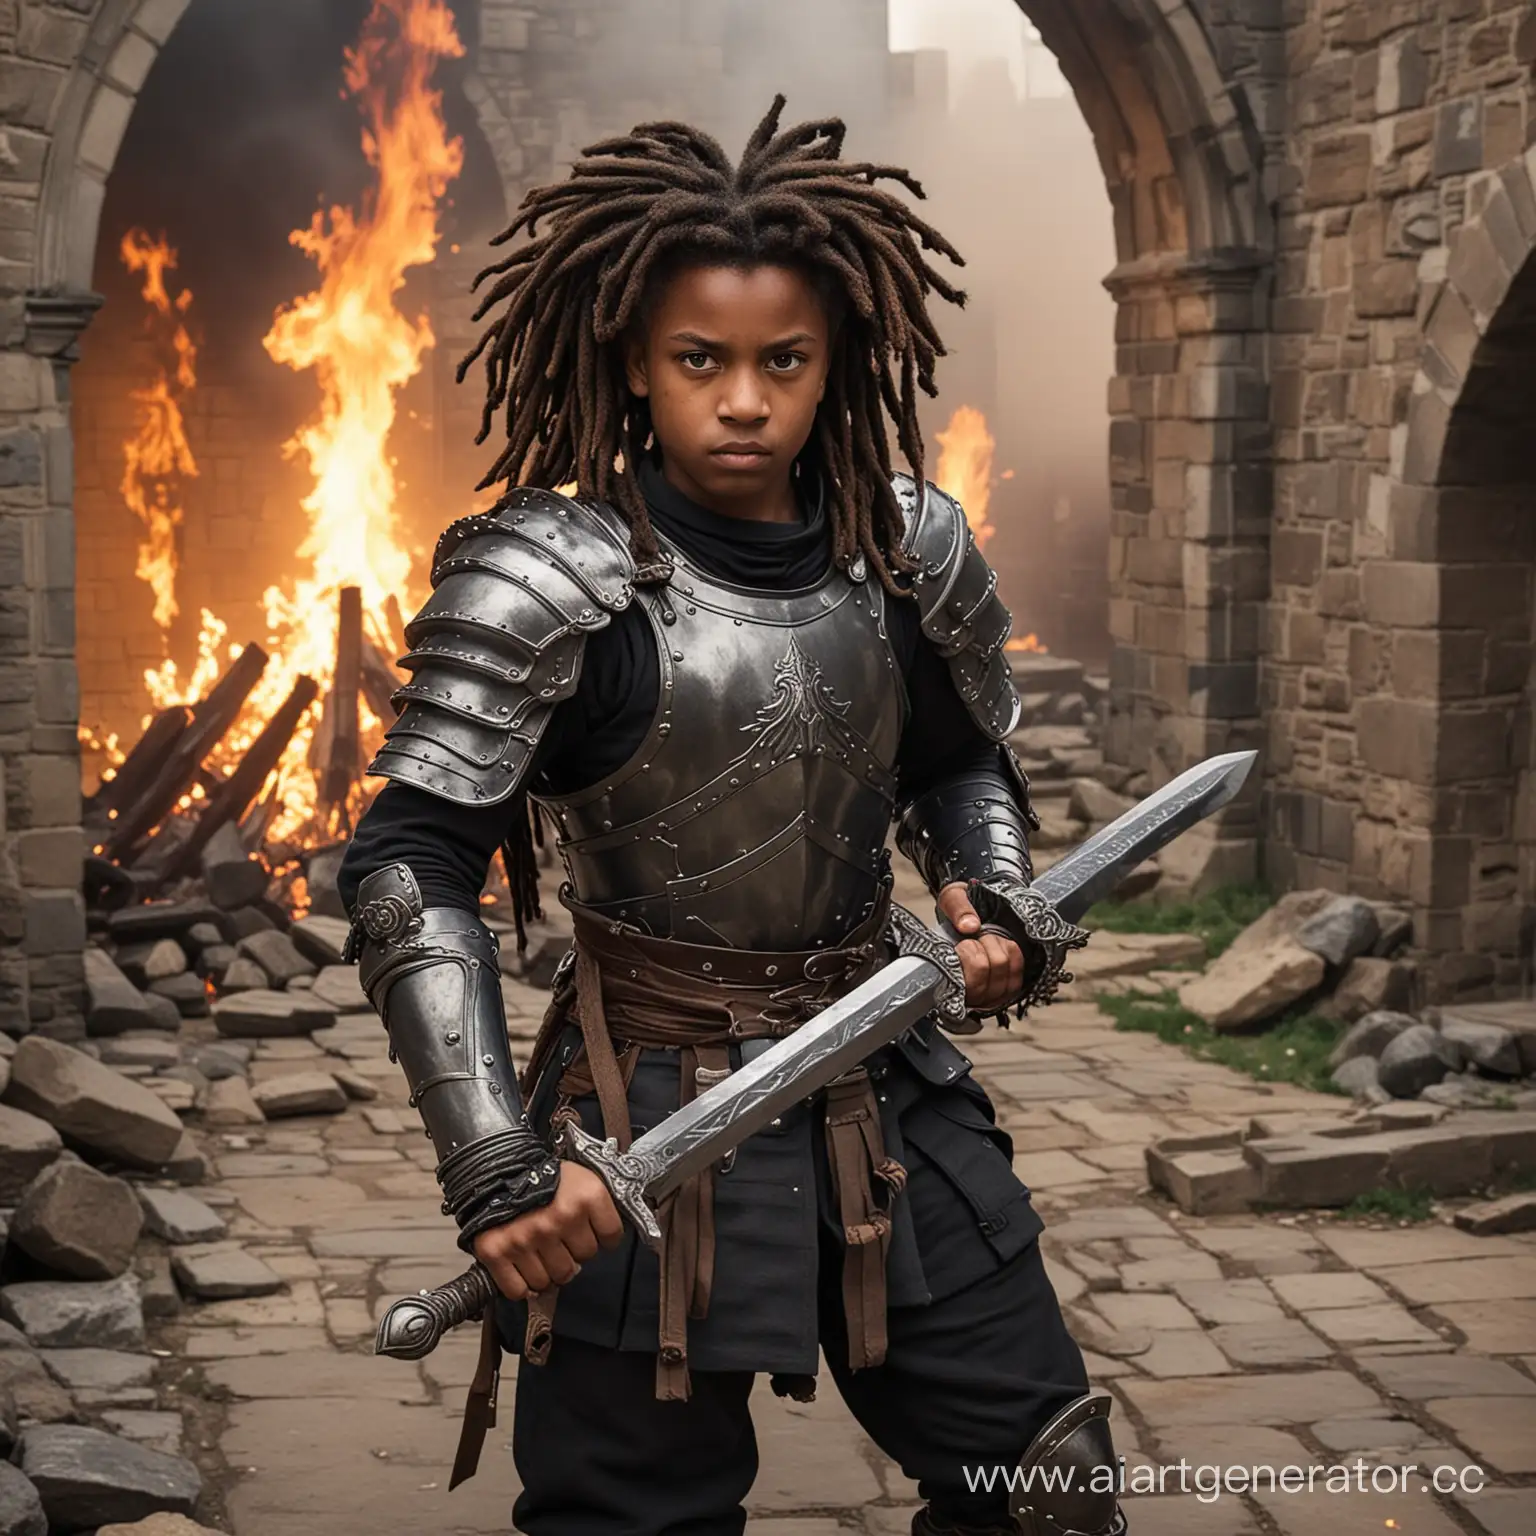 Courageous-Young-Warrior-Black-Teenage-Boy-Battles-in-Castle-Amid-Flames